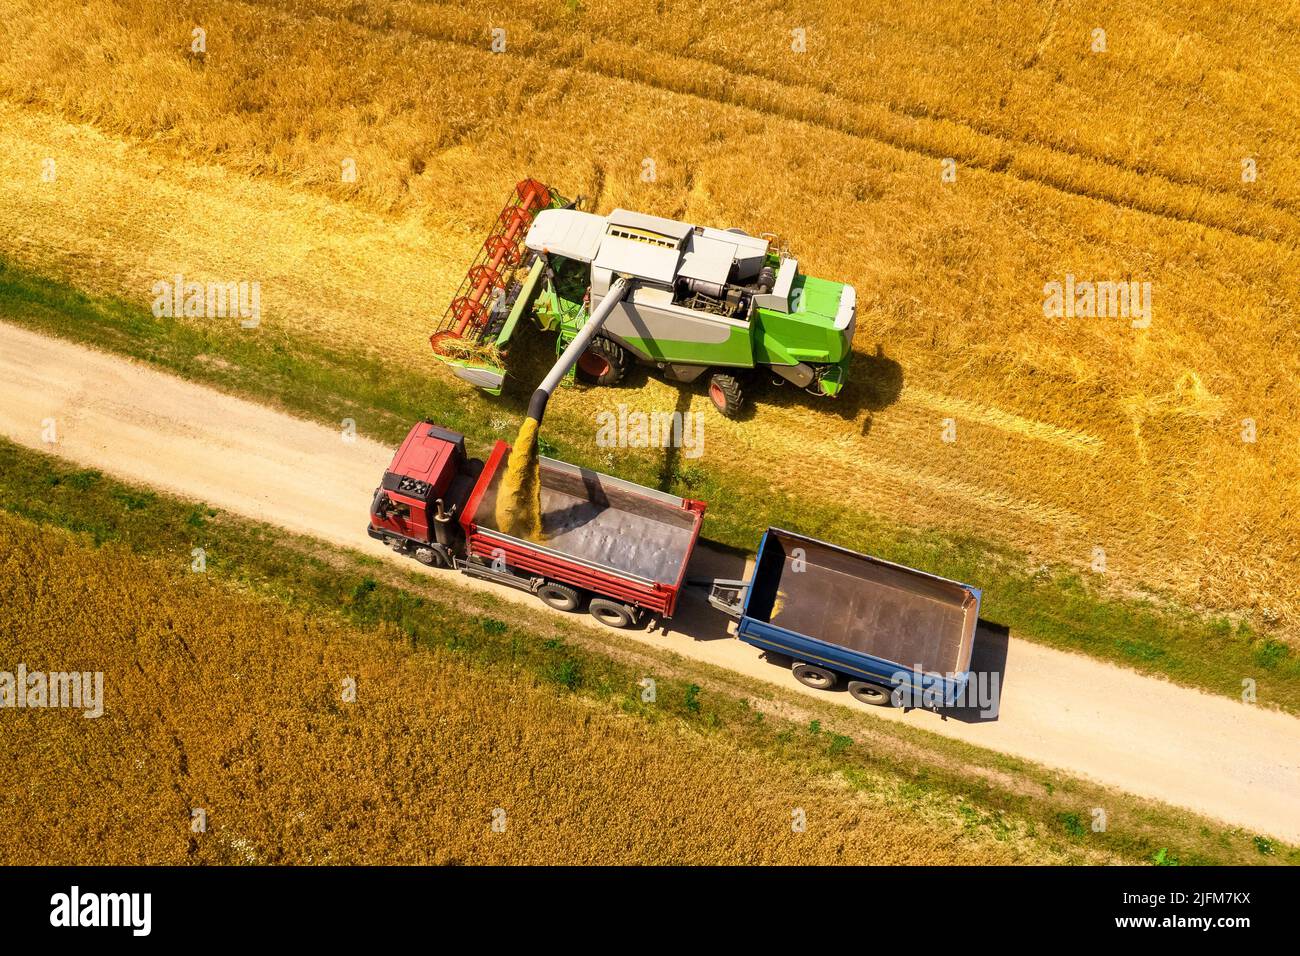 Wheat shortage, high trading prices, stockpiling. Aerial view of a combine harvester at work during harvest time. Agricultural background. Stock Photo